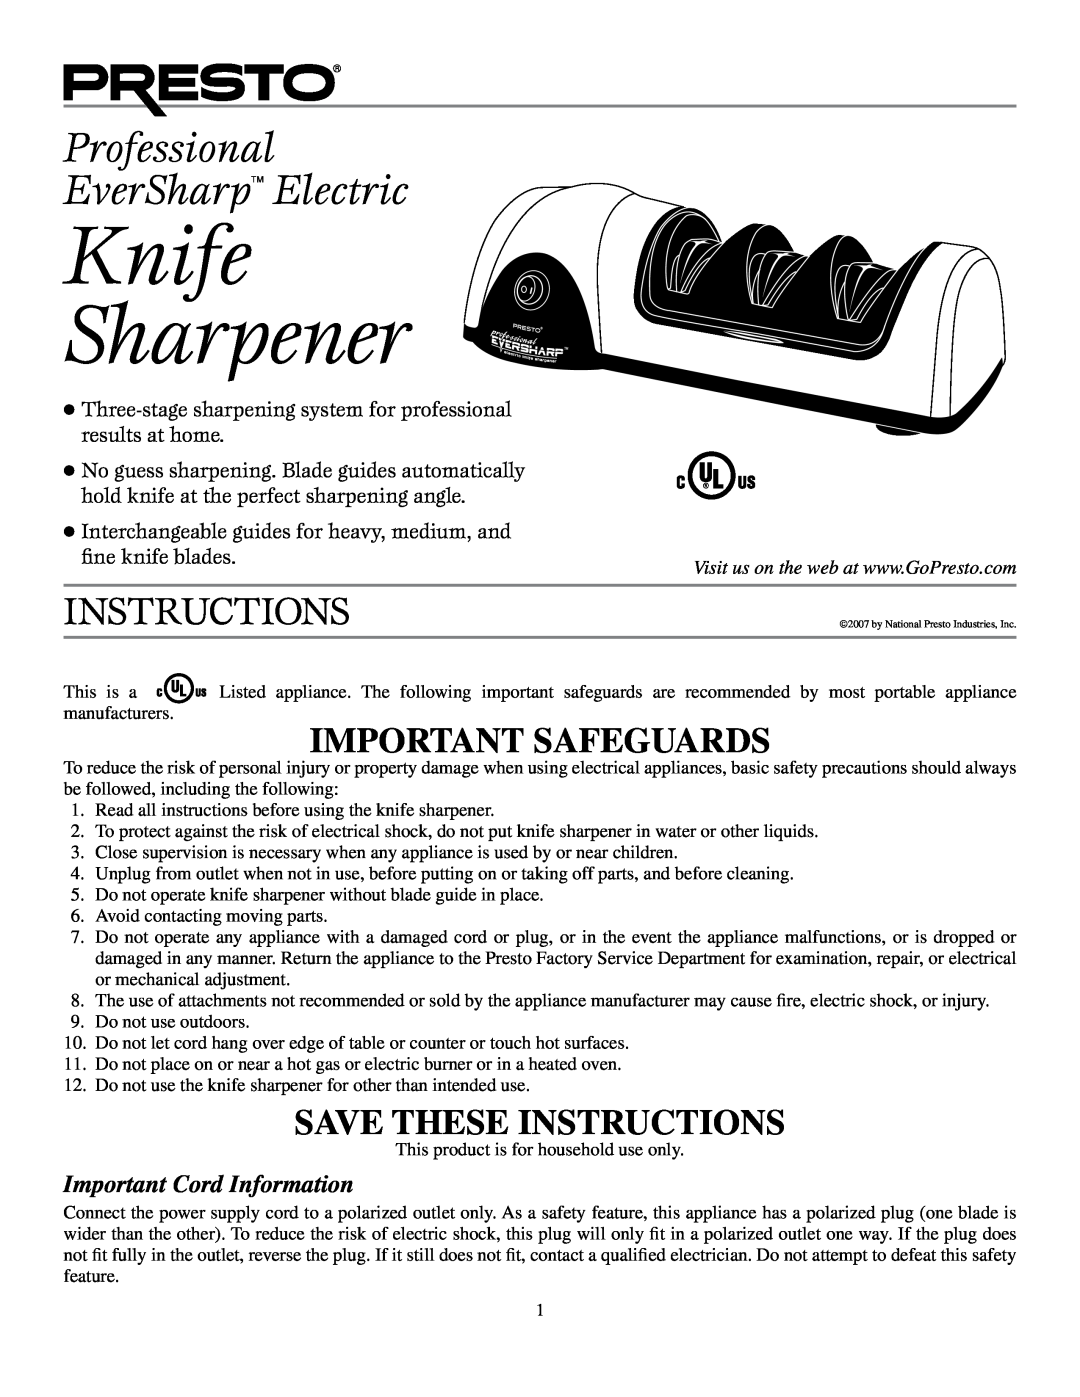 Presto Electric Knife Sharpener manual Important Cord Information, Professional EverSharp Electric, Instructions 